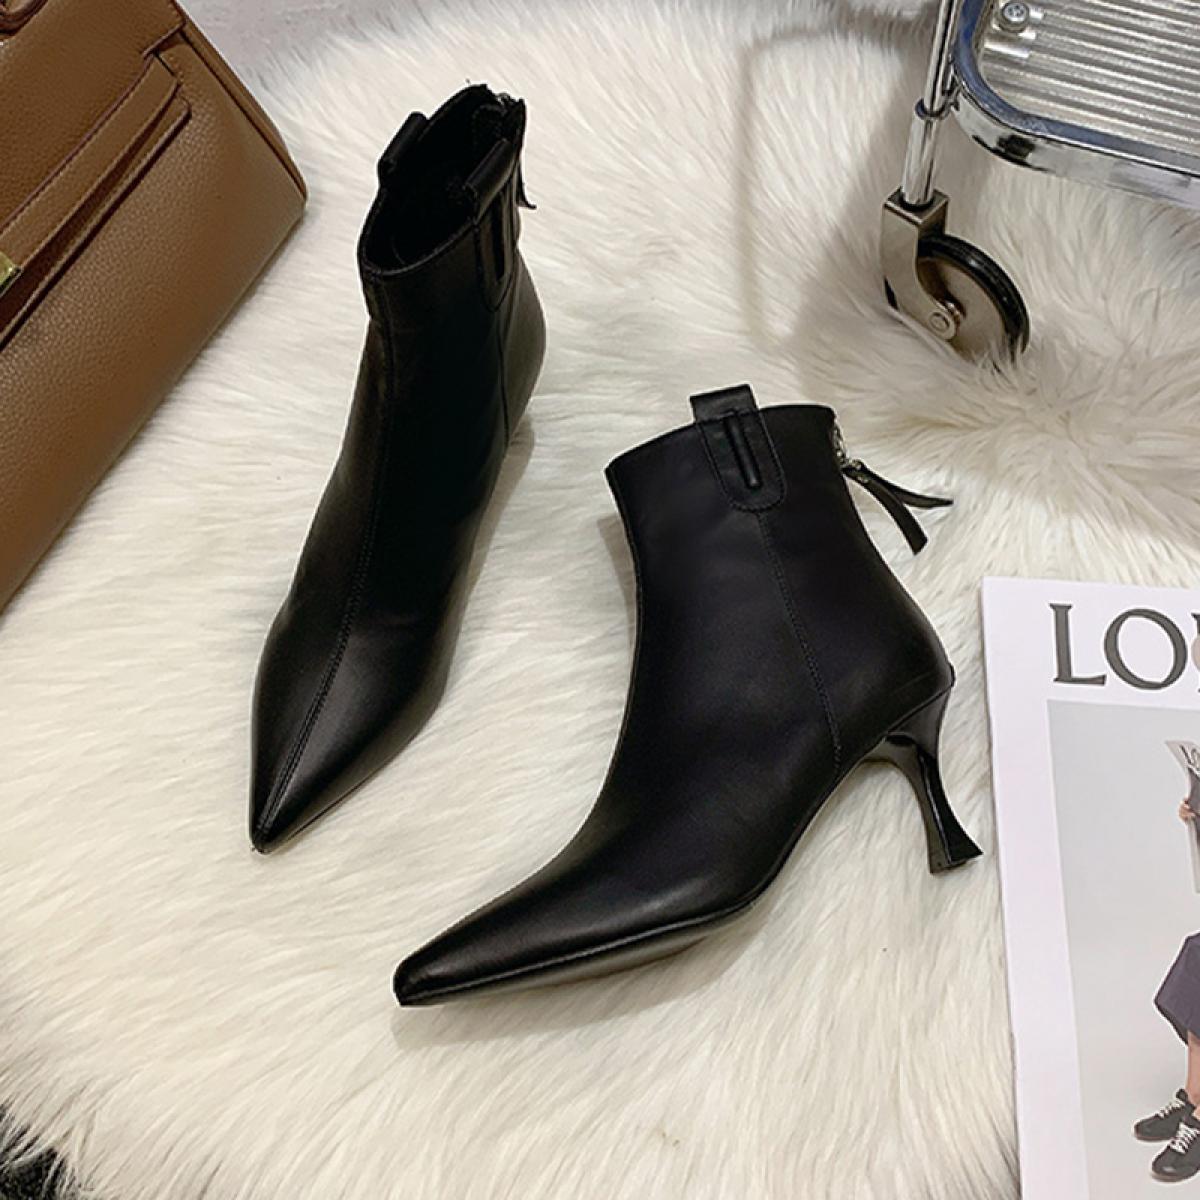 2023 New Winter Women Chelsea Boots Stilettos Shoes Fashion Ankle Motorcycle Boots Gladiator Zipper Snow Boots Punk Lady